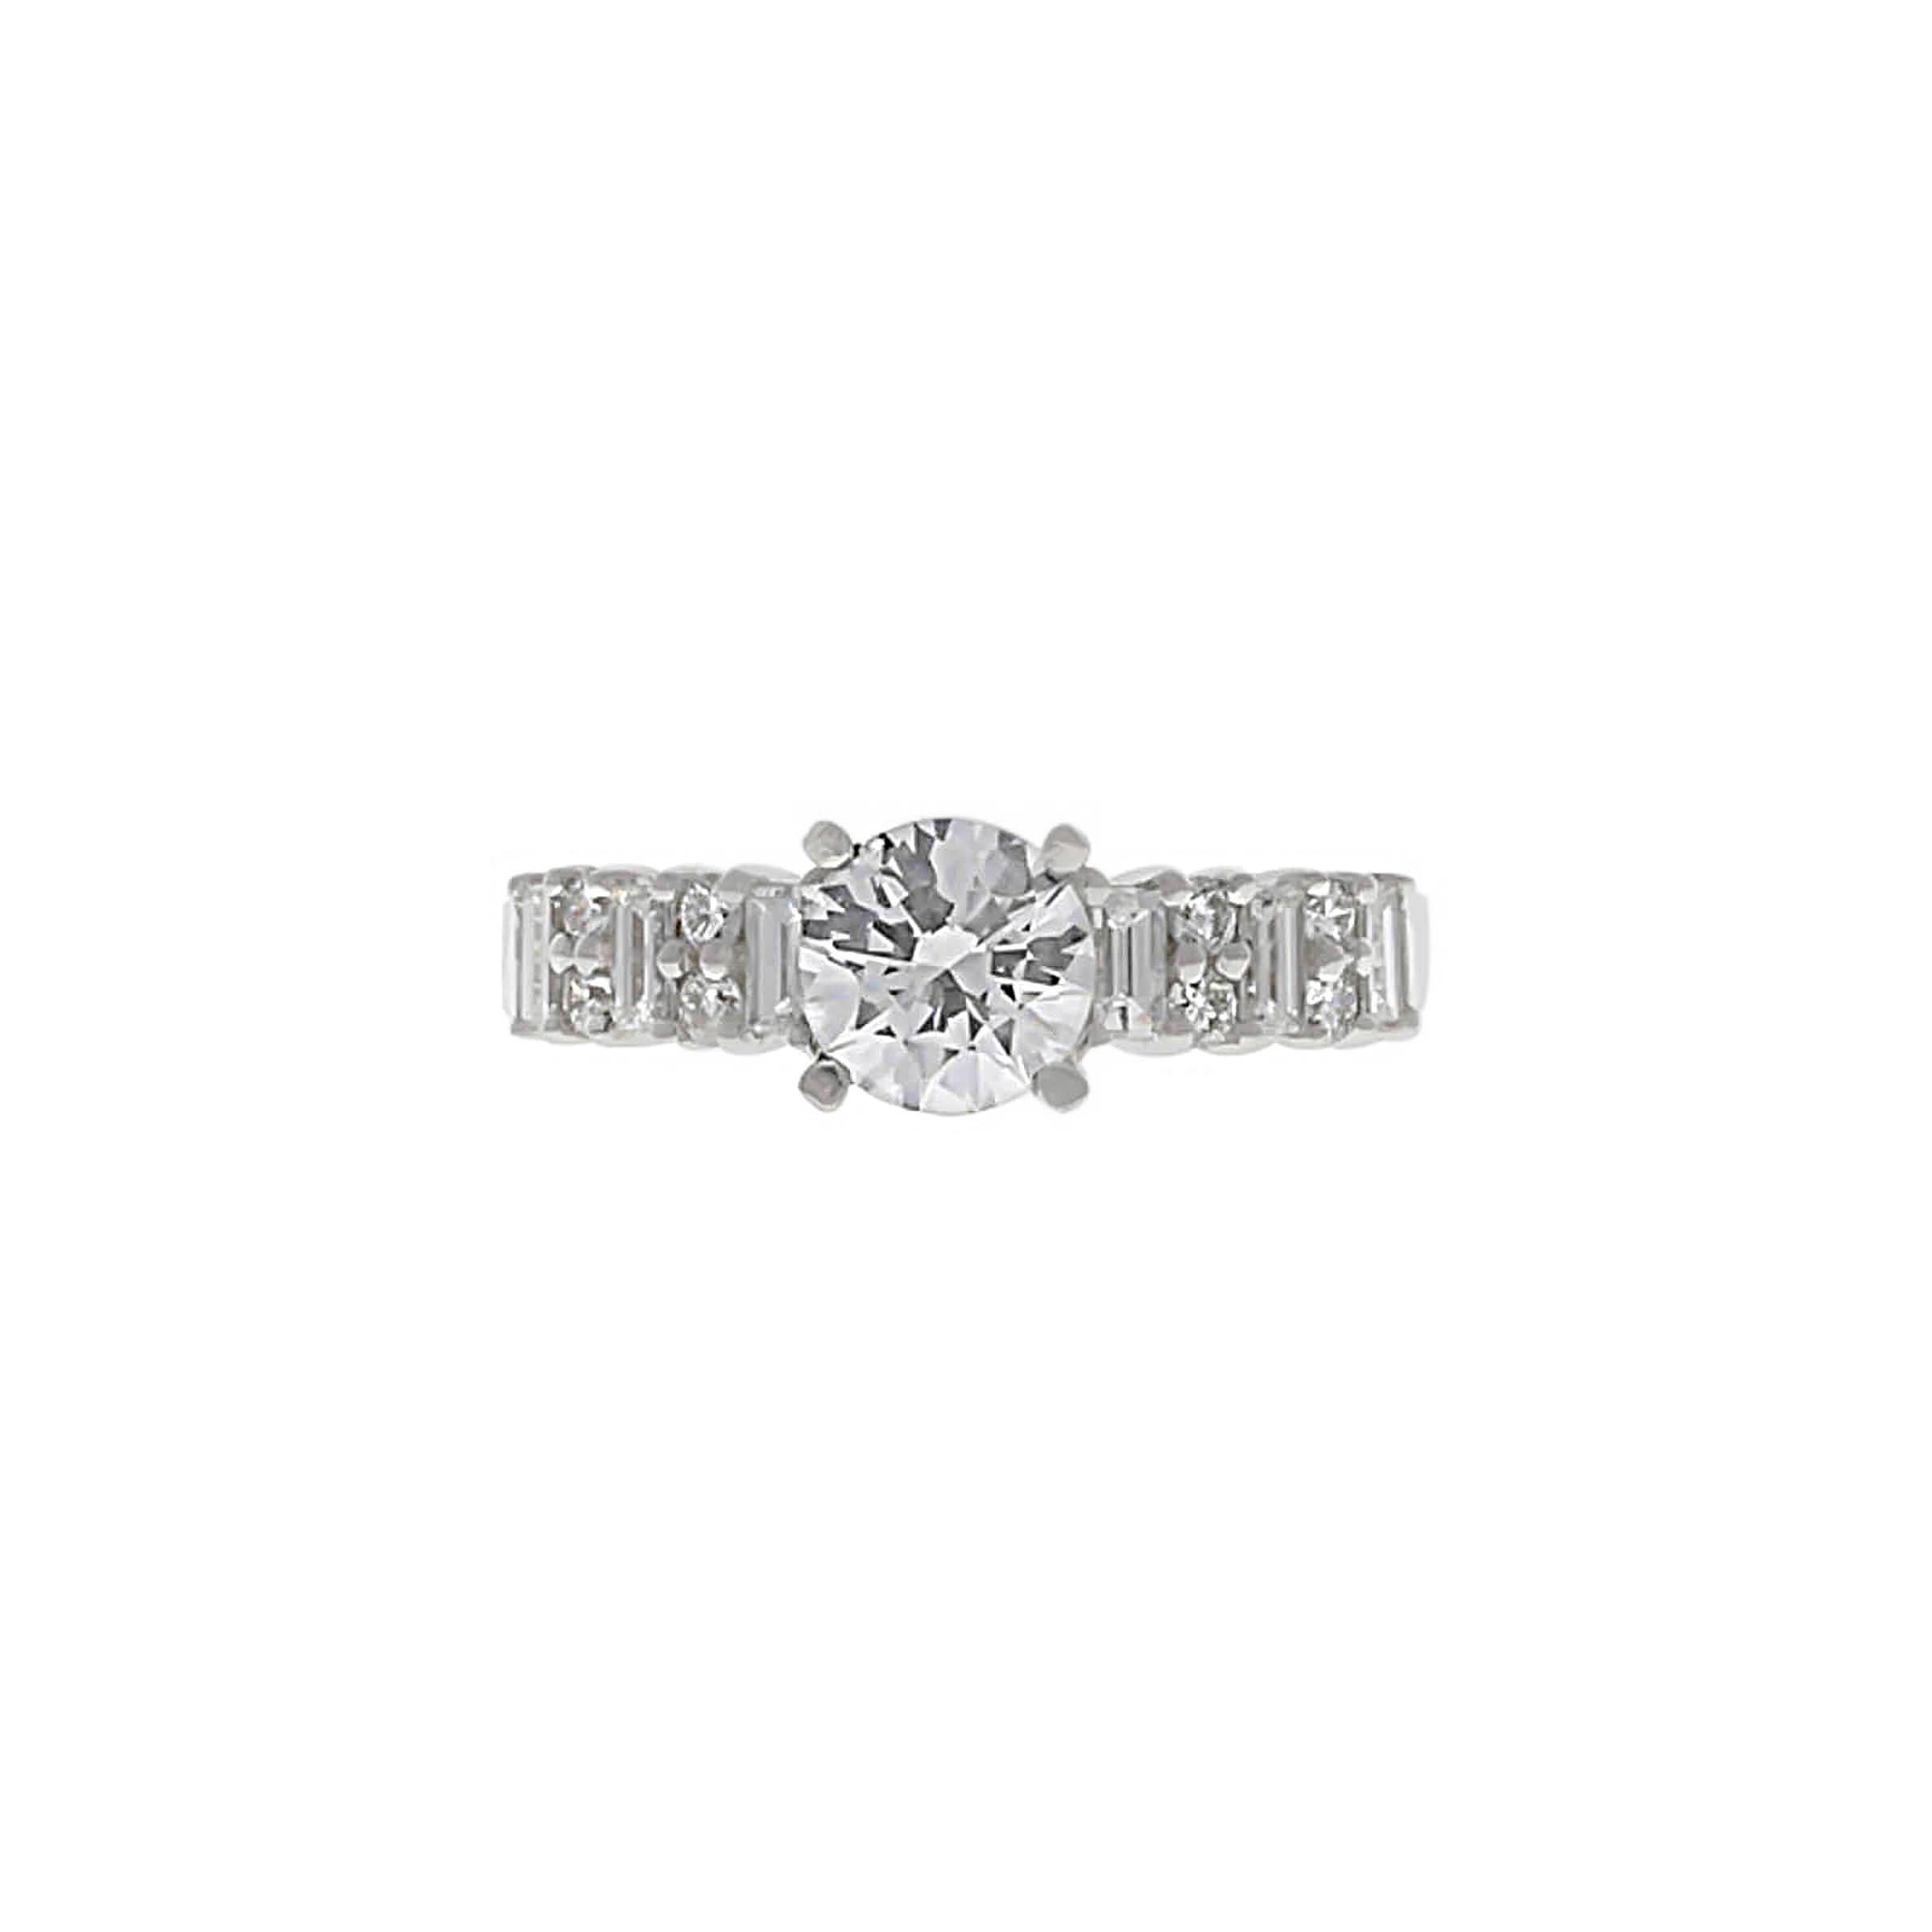 Platinum diamond engagement ring containing one round brilliant cut weighing exactly 1.05 carat, G color, VS2 clarity. The diamond comes with a GIA Grading Report. The mounting contains eight round full cut diamonds and six baguette diamonds.
The